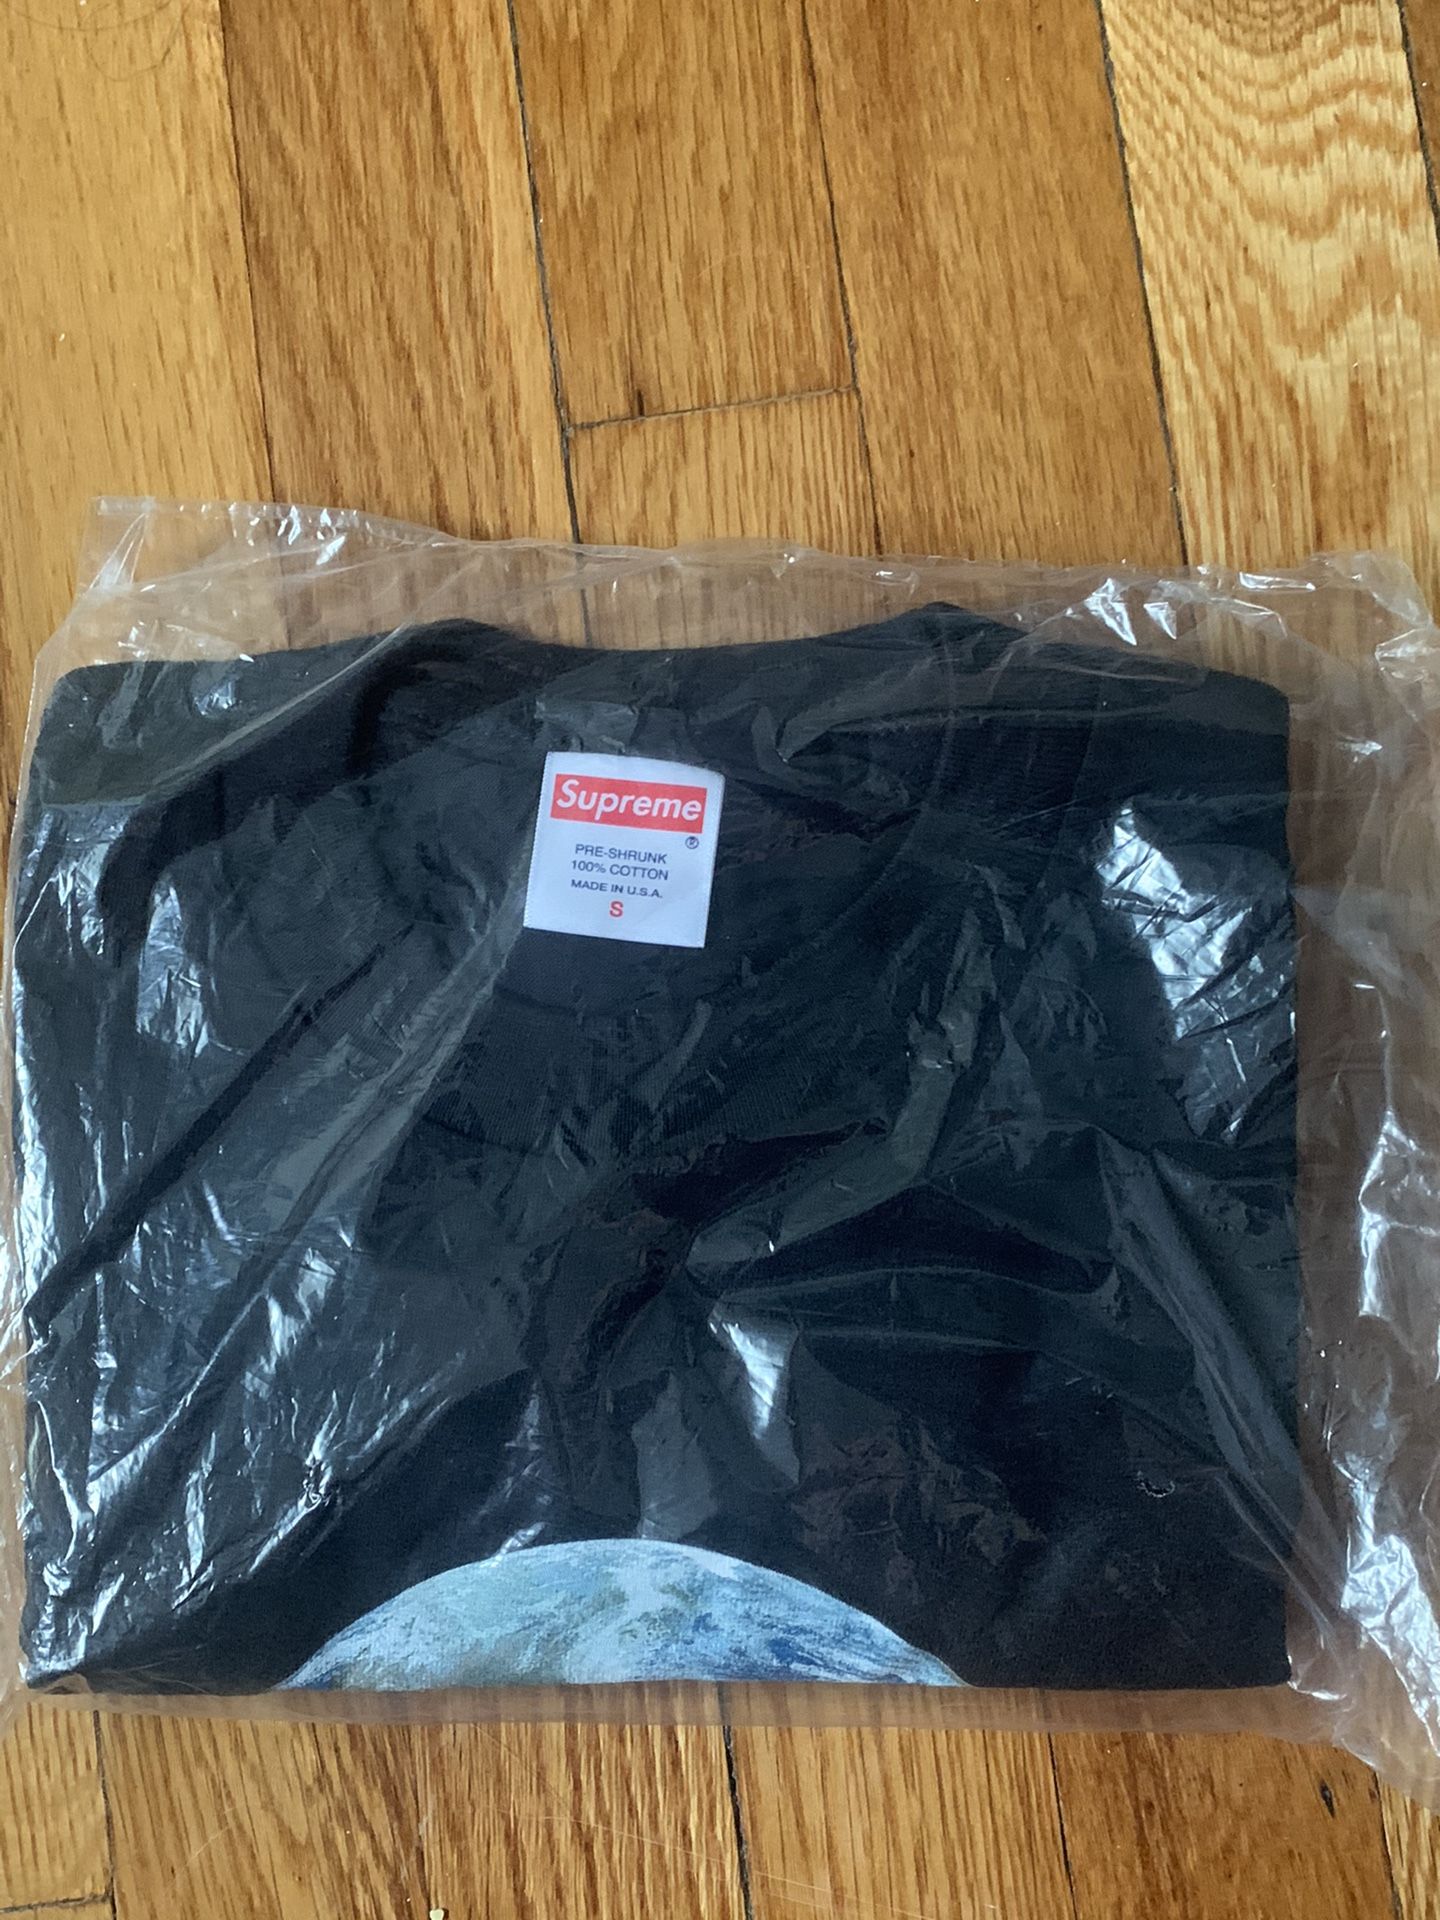 Supreme one world tee size SMALL